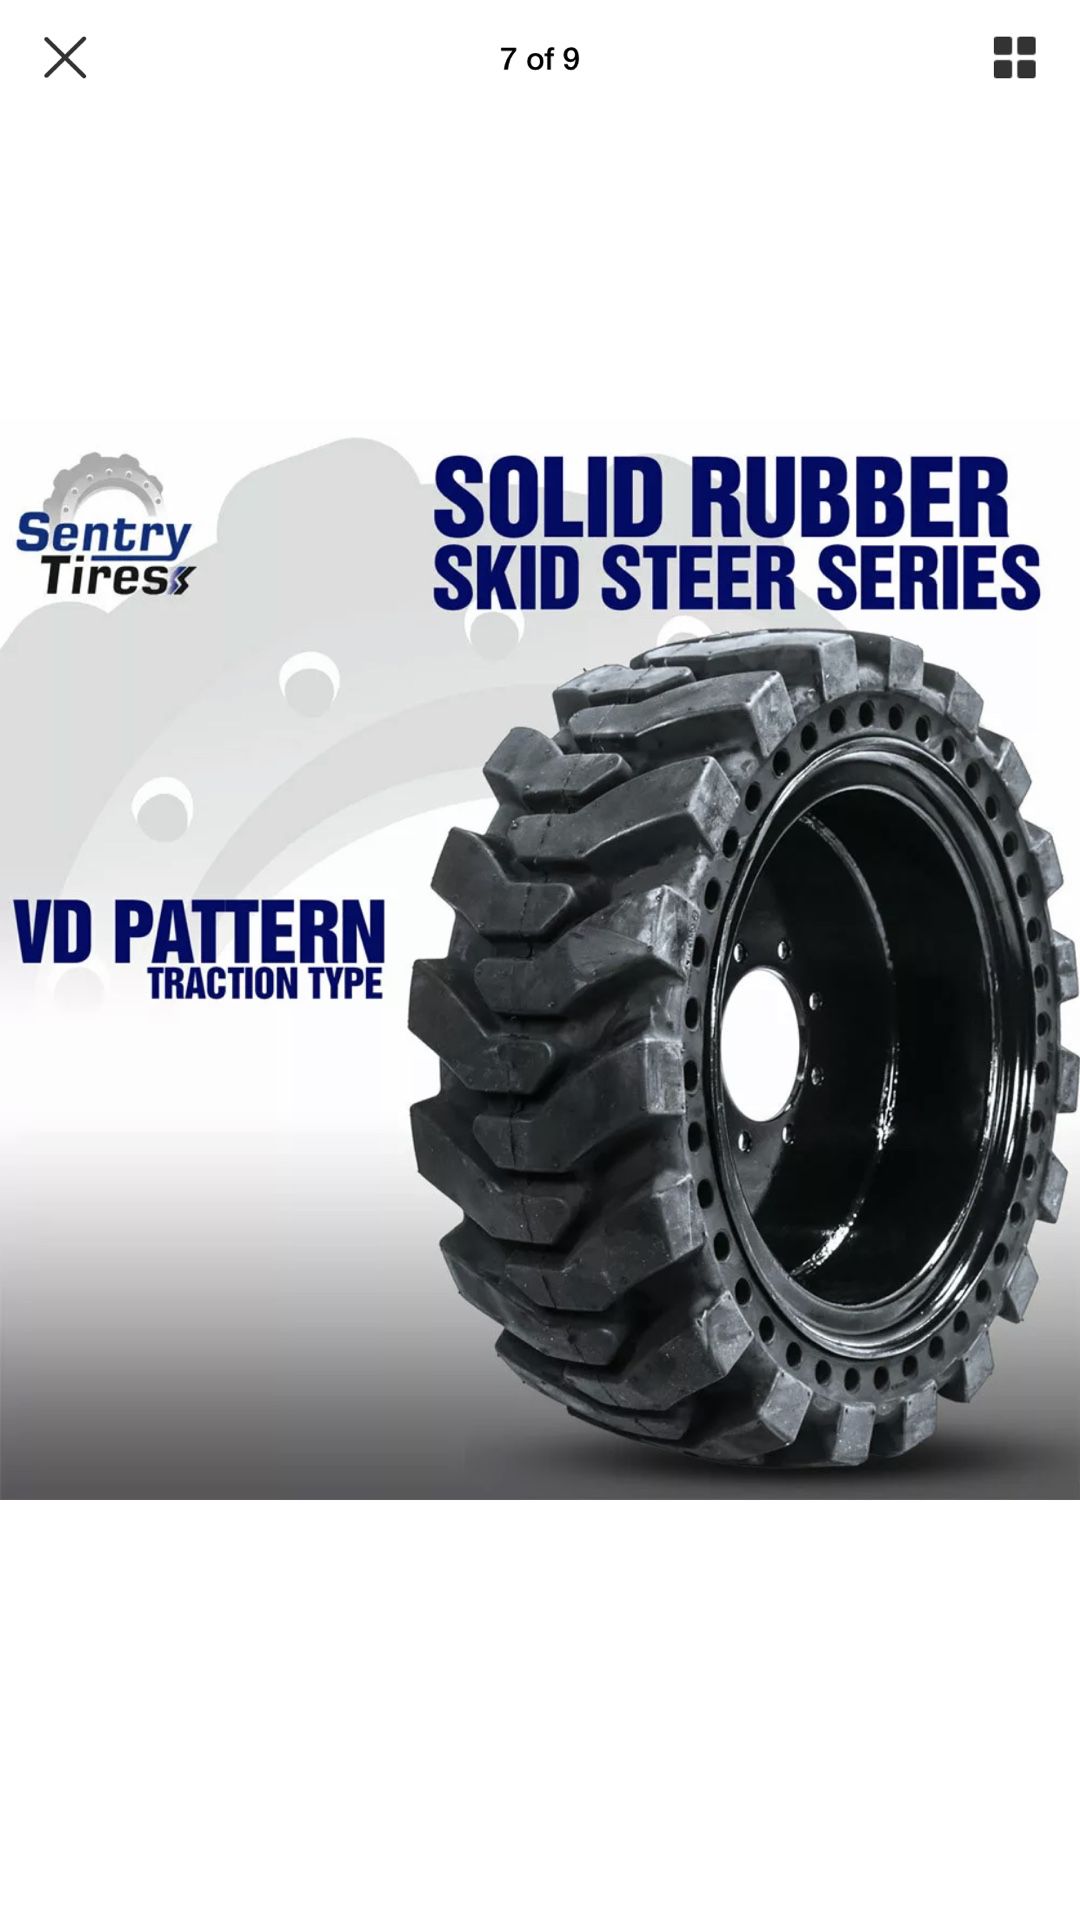 A Set of 4 Skid Steer Tires with Rims Size 10x 16.5, 8 bolt holes